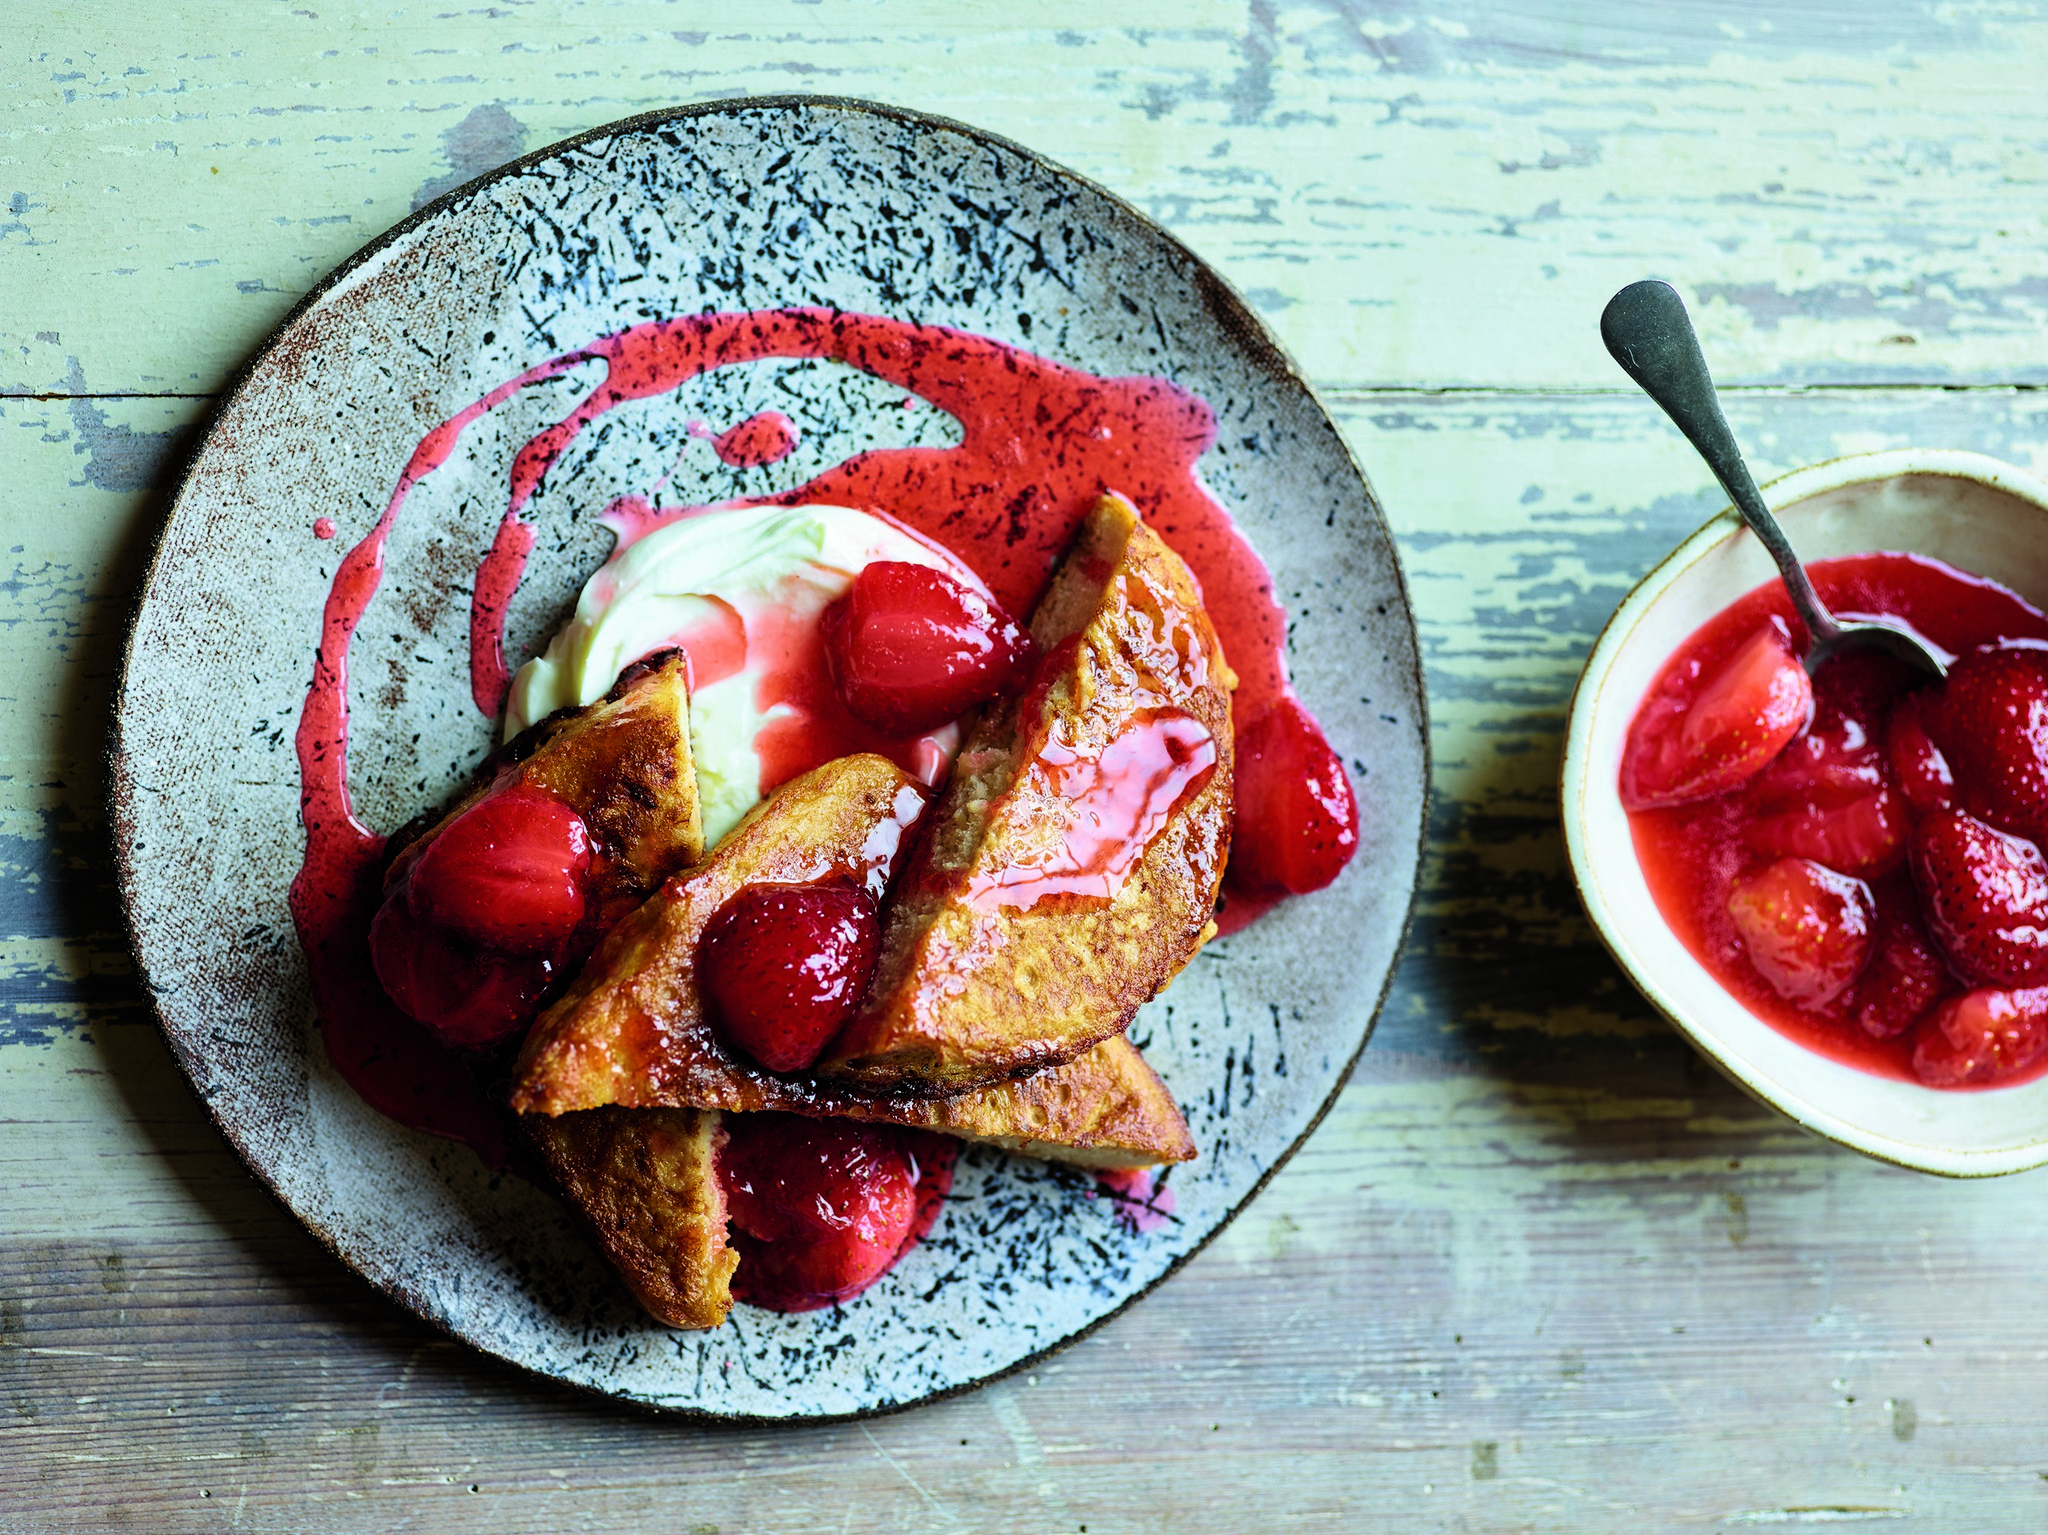 51.banana eggy bread with strawberry compote.jpg